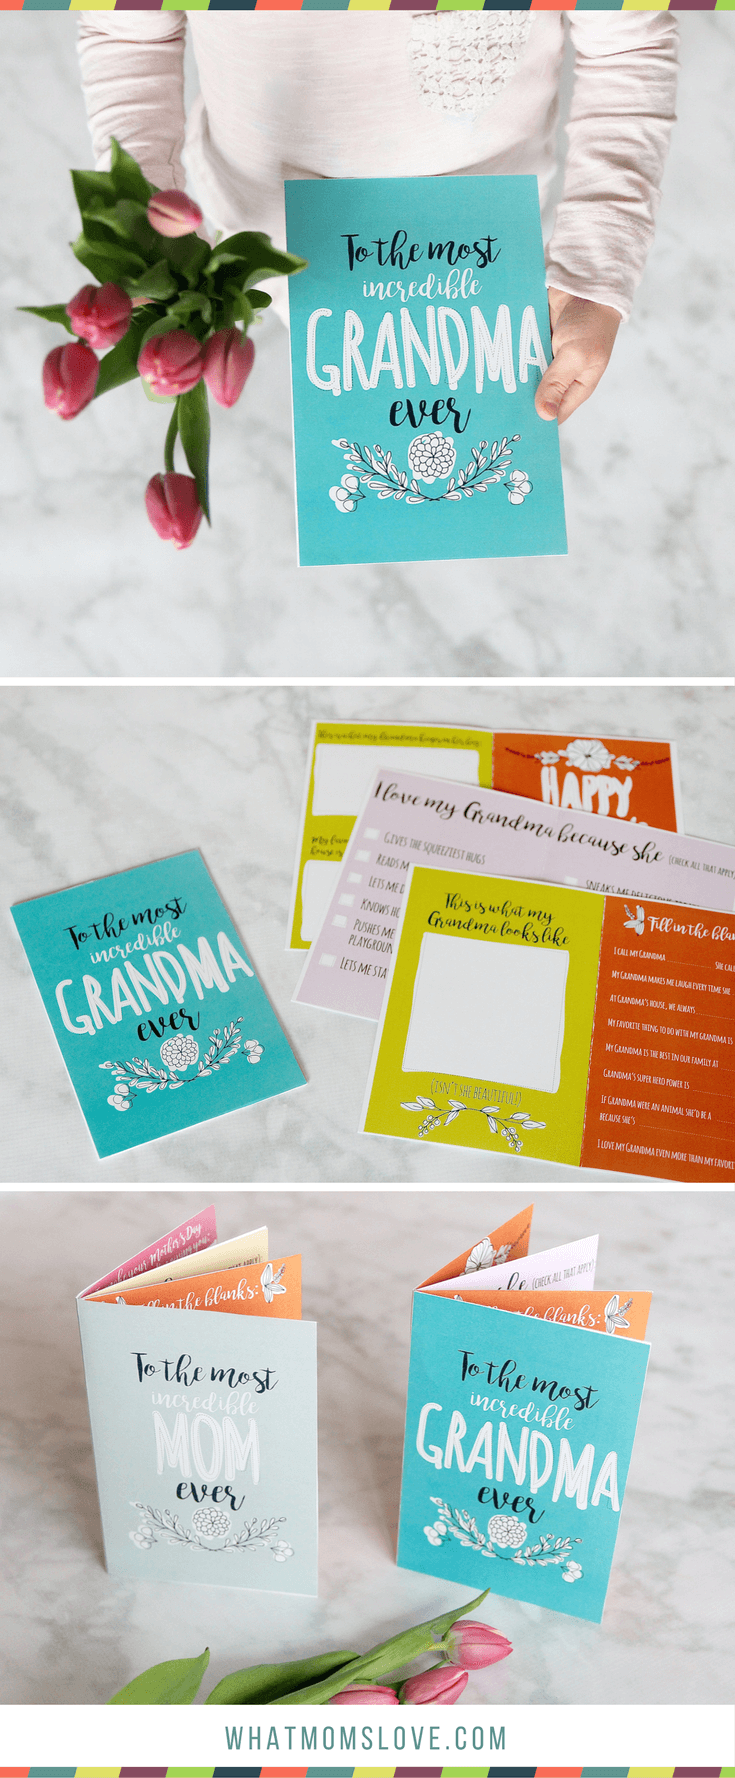 Free Printable Mothers Day Card | All About Mom or Grandma Book for kids to make - includes fun questionnaire, coupons for mom, and space to draw and color. The perfect DIY homemade card - super easy!